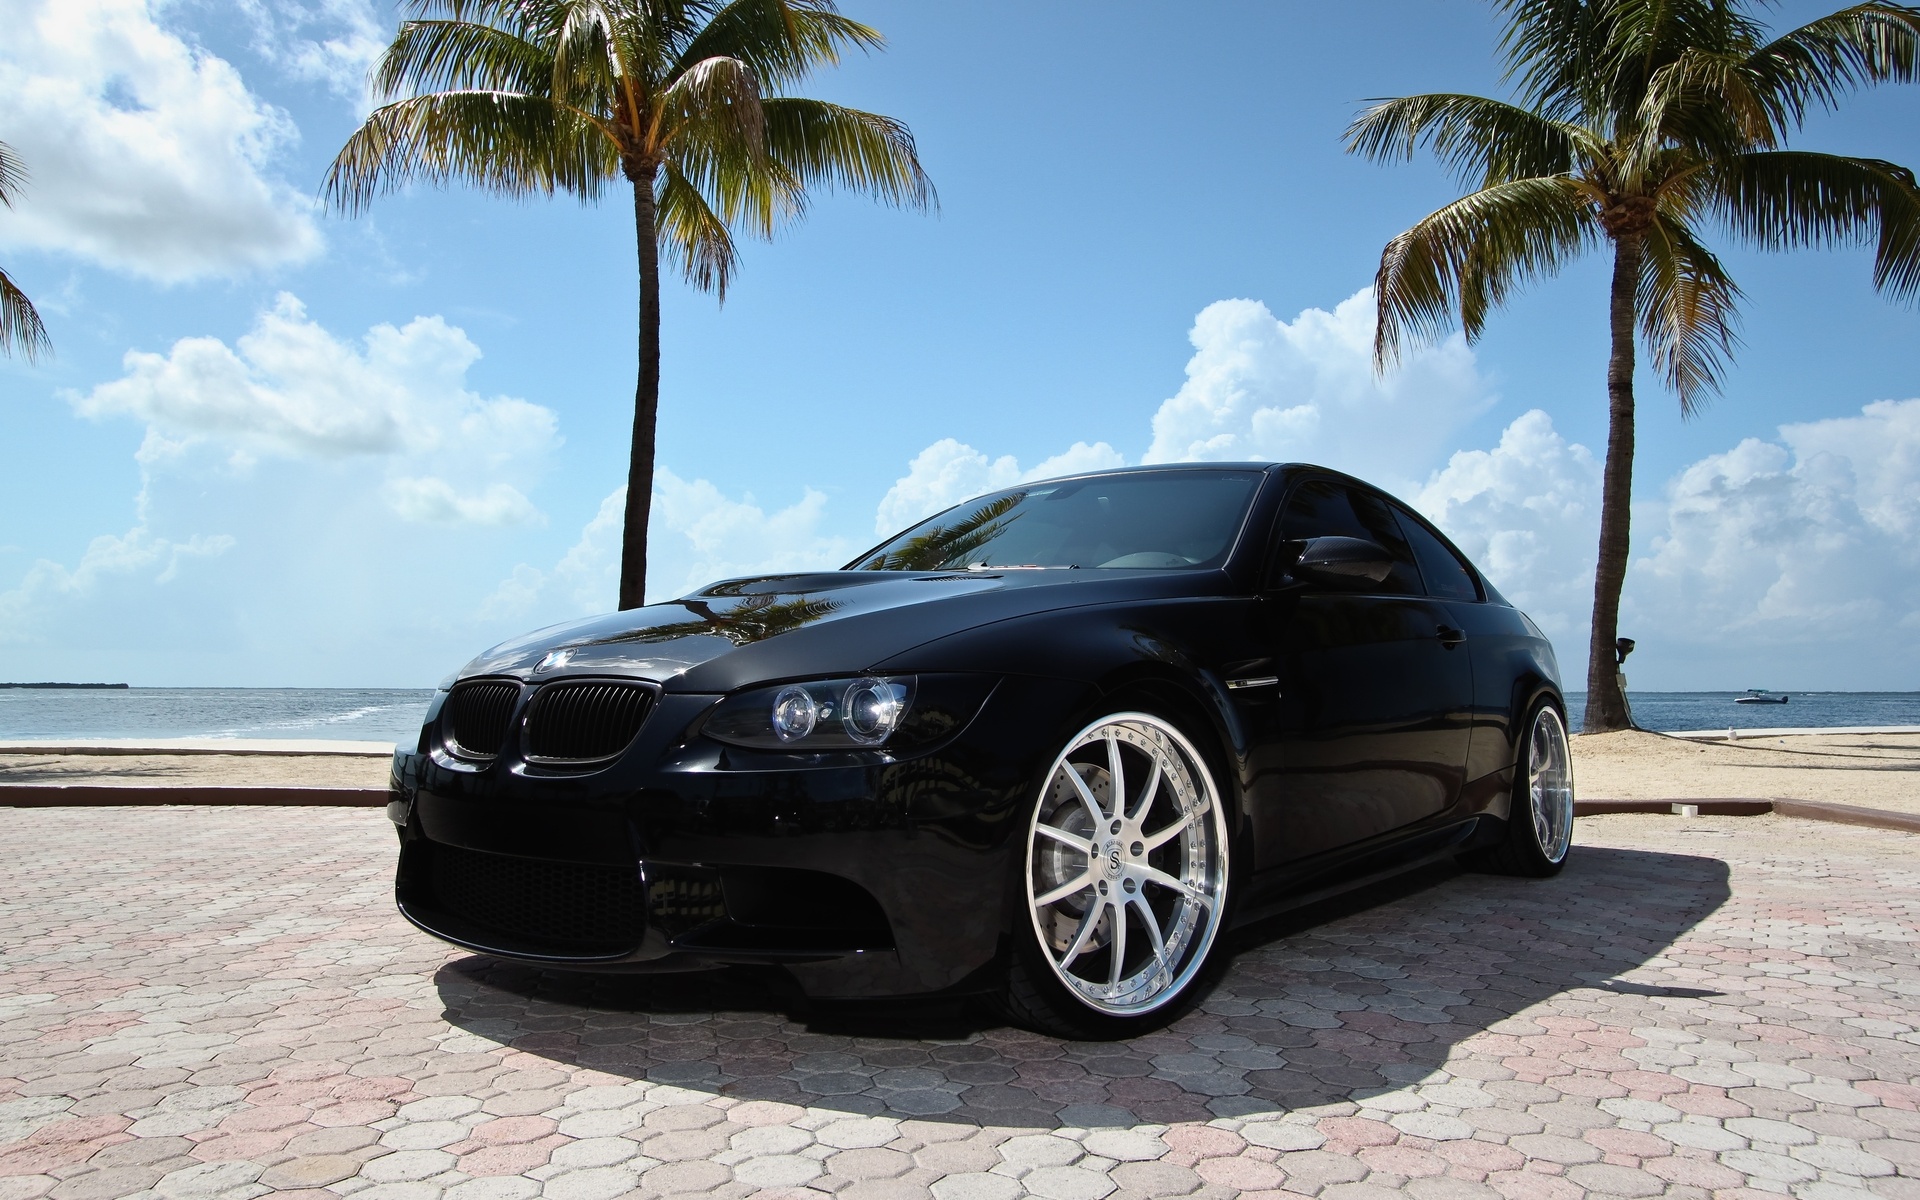 strasse, Forged, 2011, Bmw, M3, Vehicles, Cars, Wheels, Tuning, Roads, Ocean, Sea, Sky, Clouds, Palm, Trees, Black, Stance, Chrome, Aluminum Wallpaper